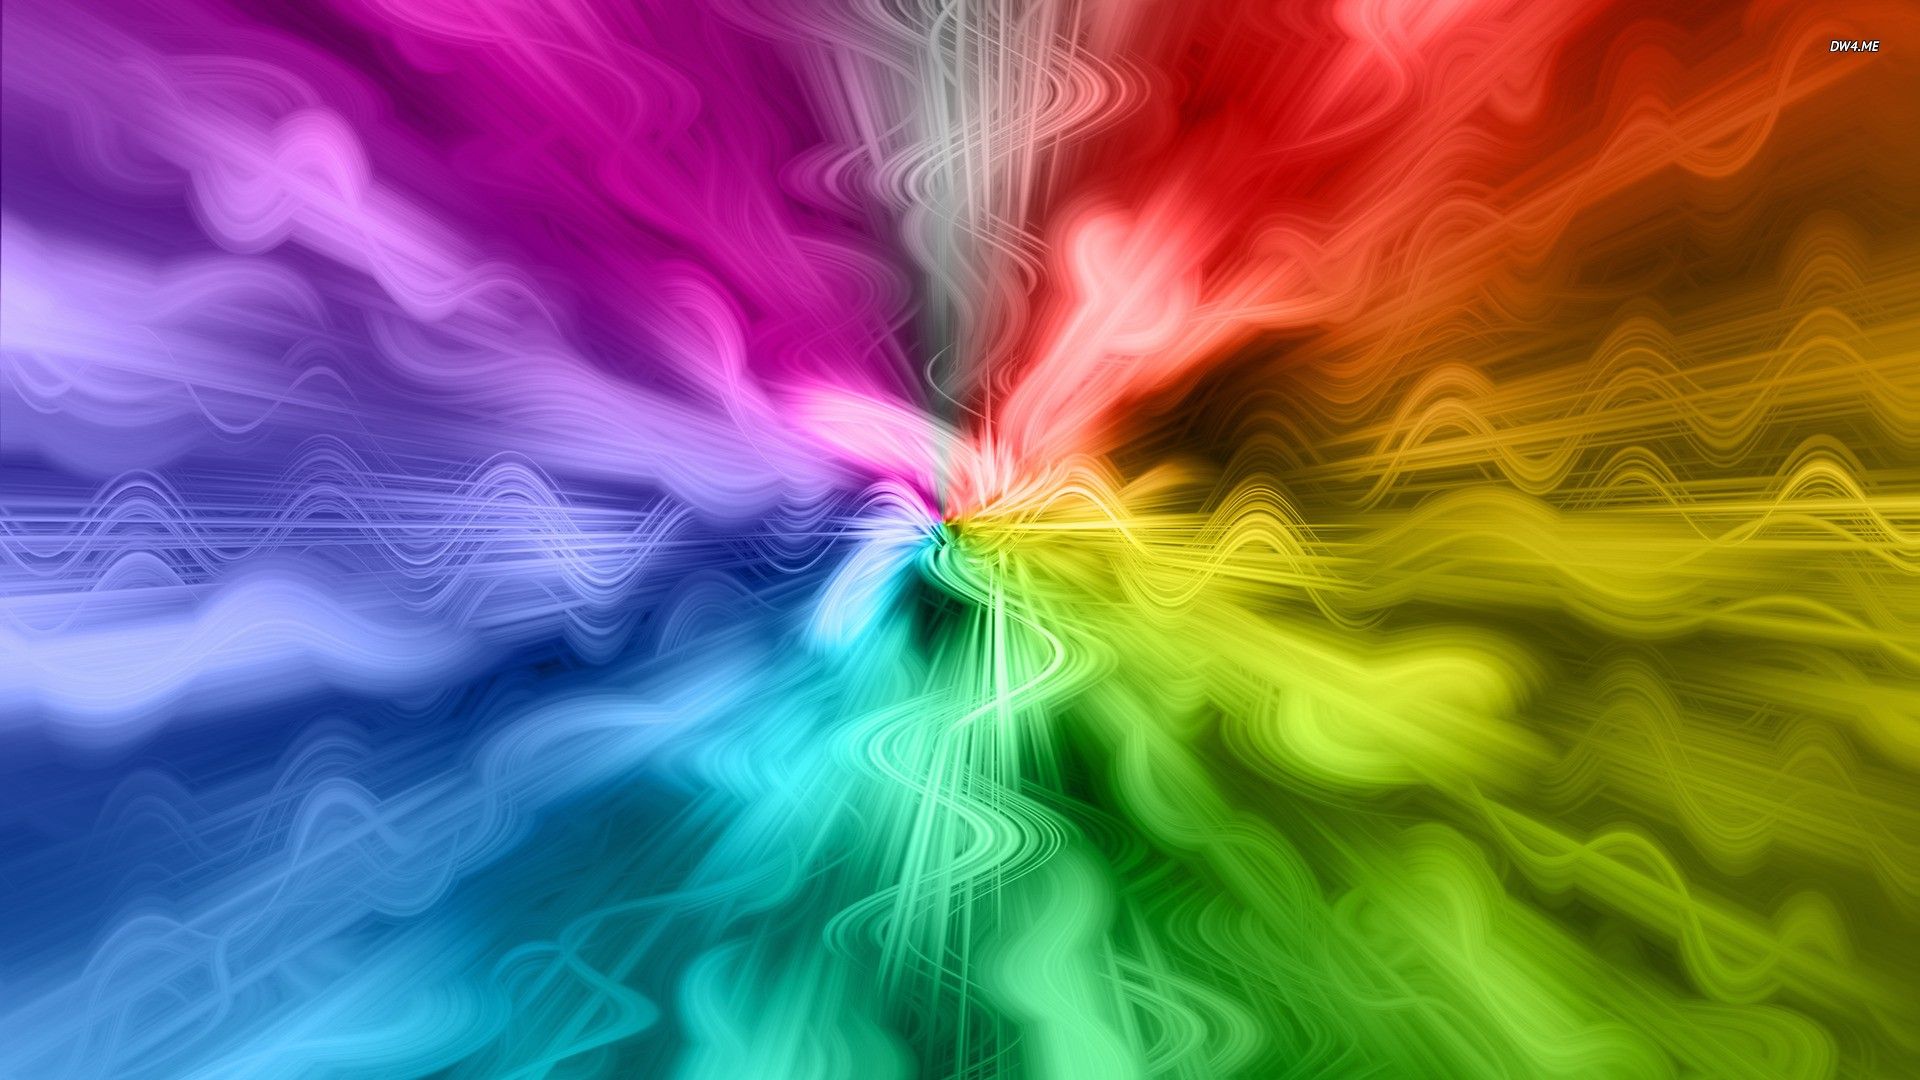 Rainbow Waves 1920x1080 Abstract Wallpaper HD Desktop Wallpaper High Definition Monitor Download Free Amazing Background Photo Artwork 192